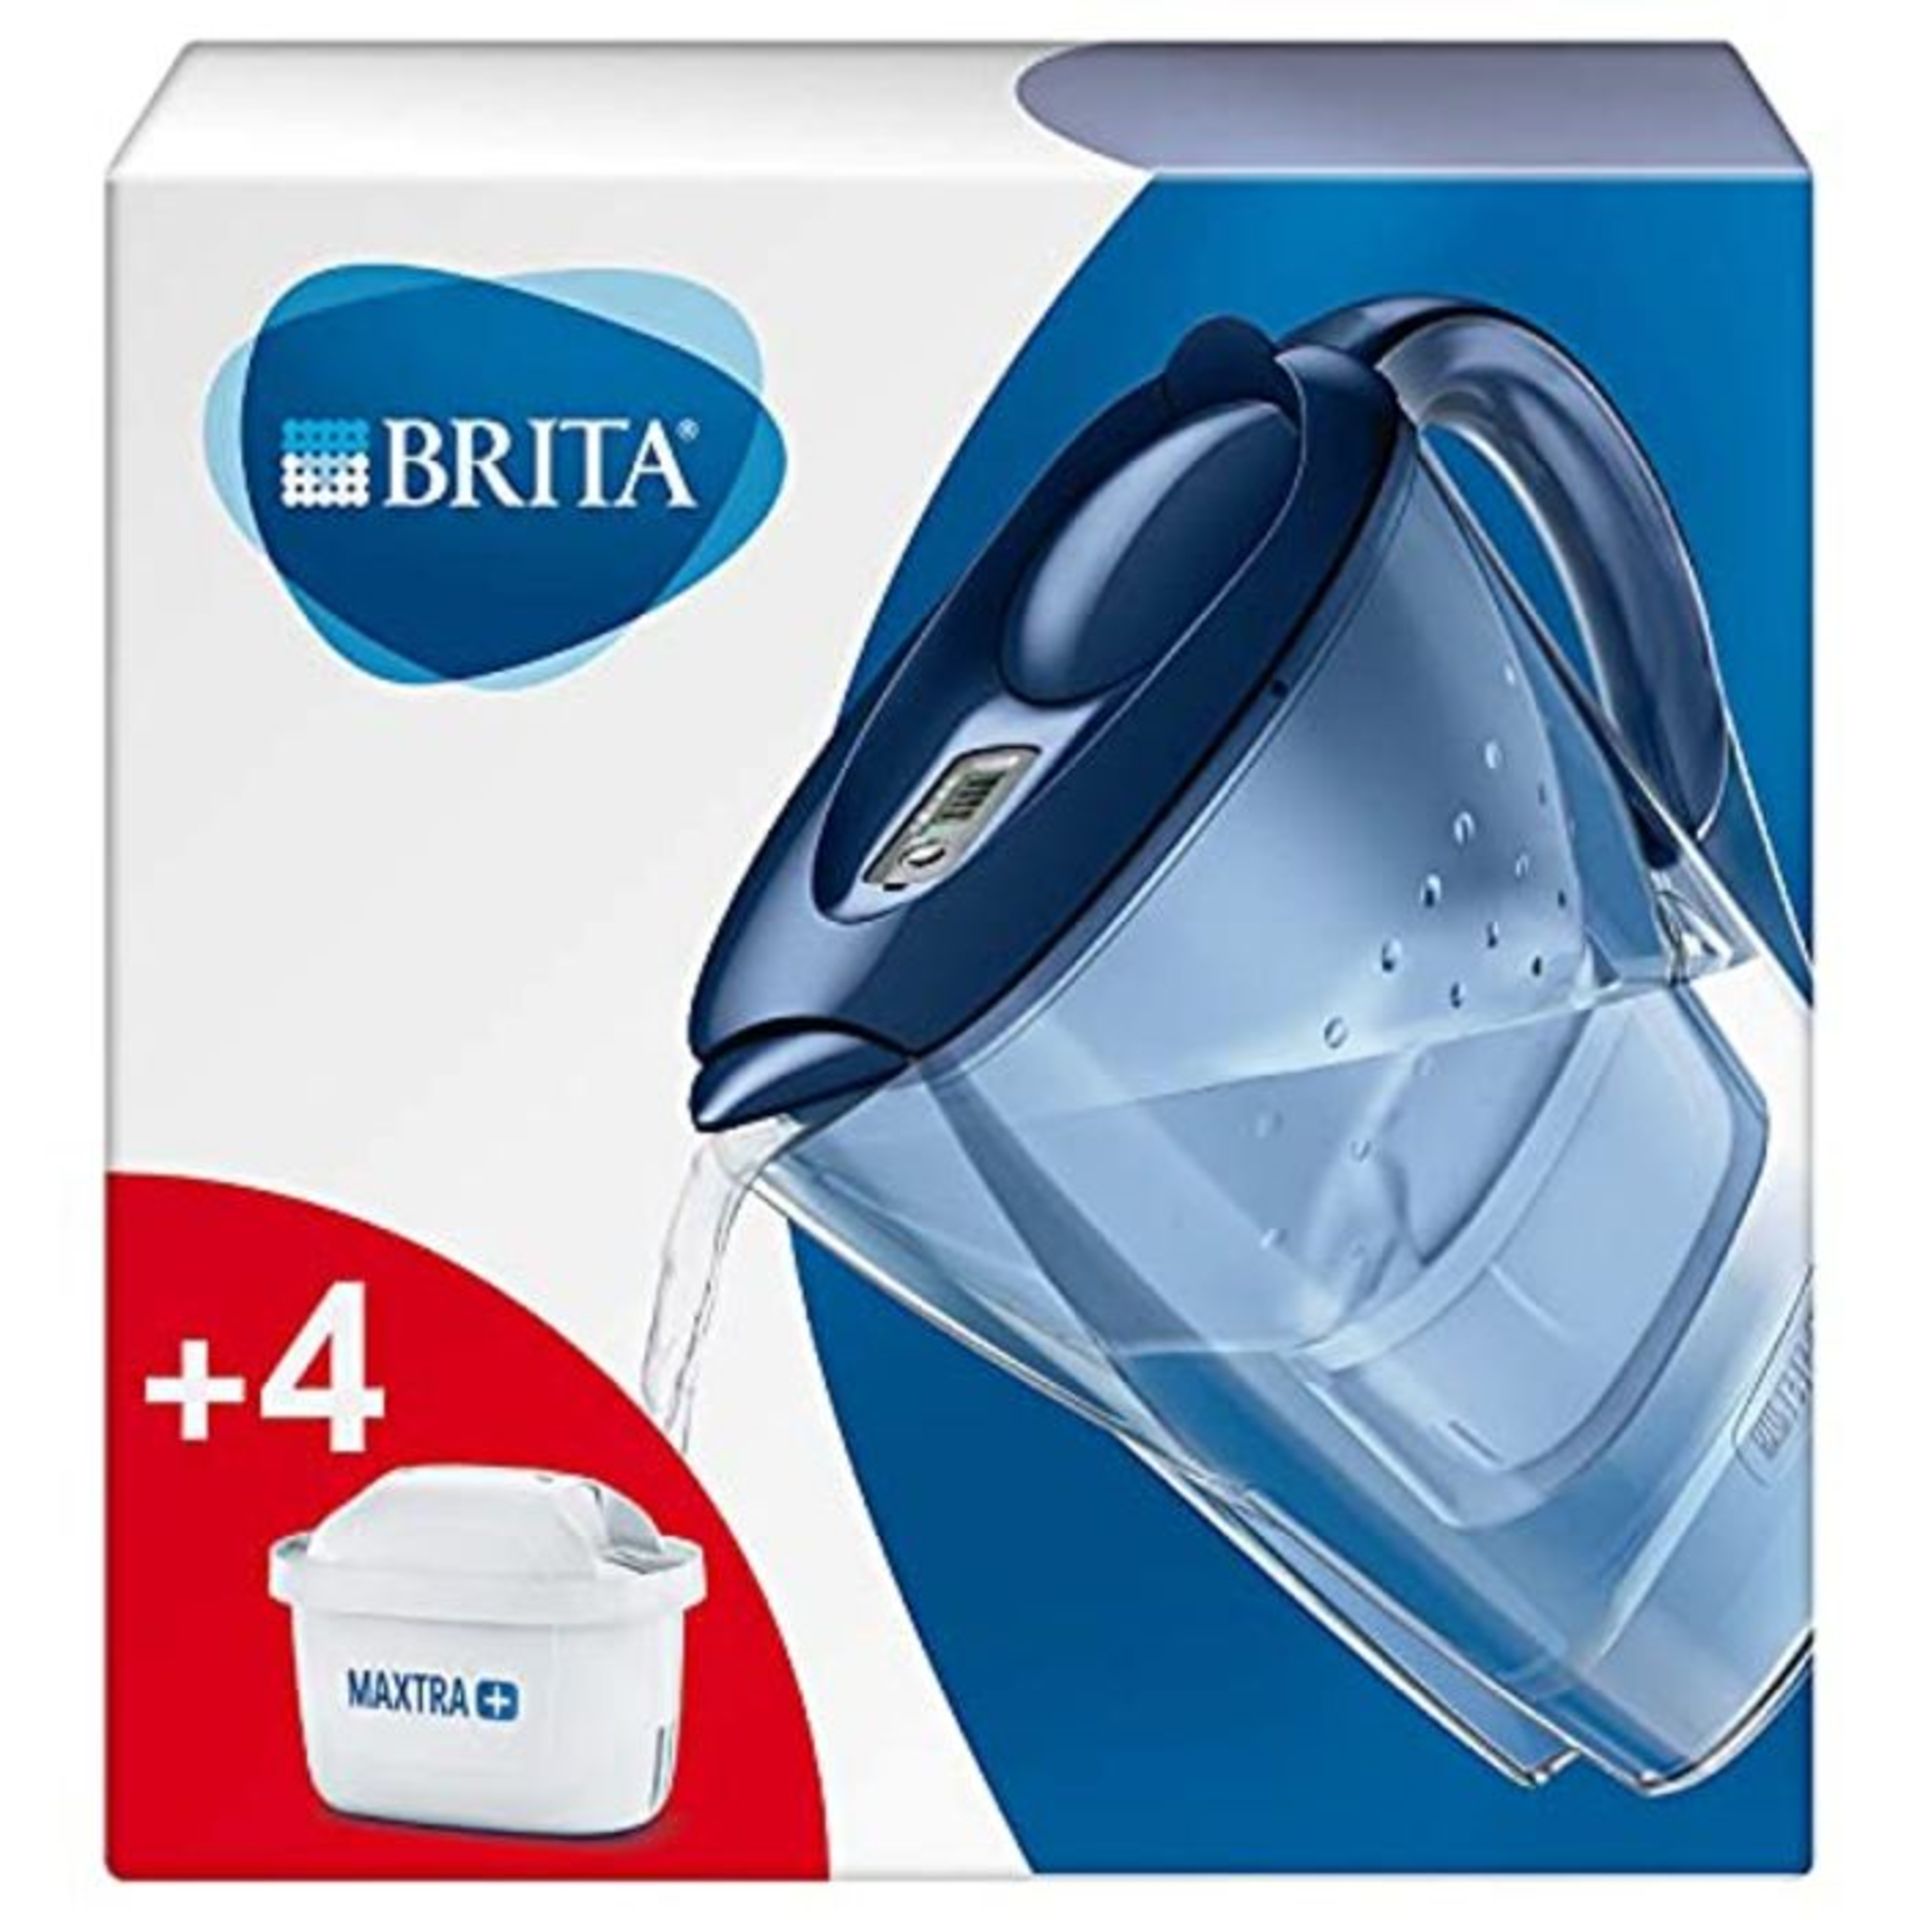 [CRACKED] BRITA Marella fridge water filter jug for reduction of chlorine, limescale a